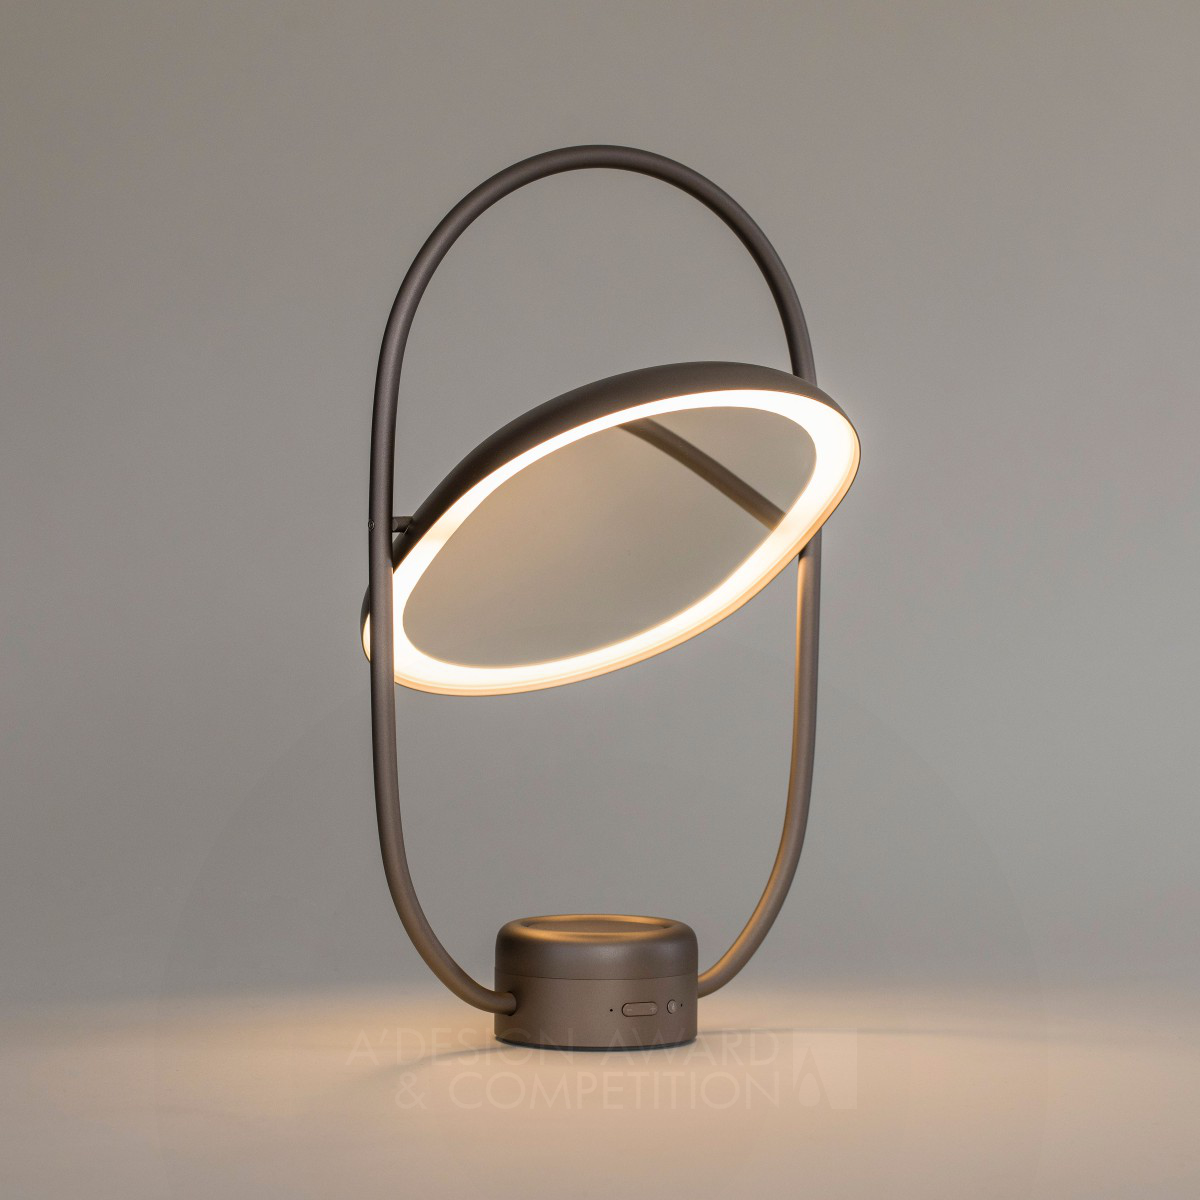 Lei Light Reflection Multifunctional Lighting by ANTBEE CO,.Ltd